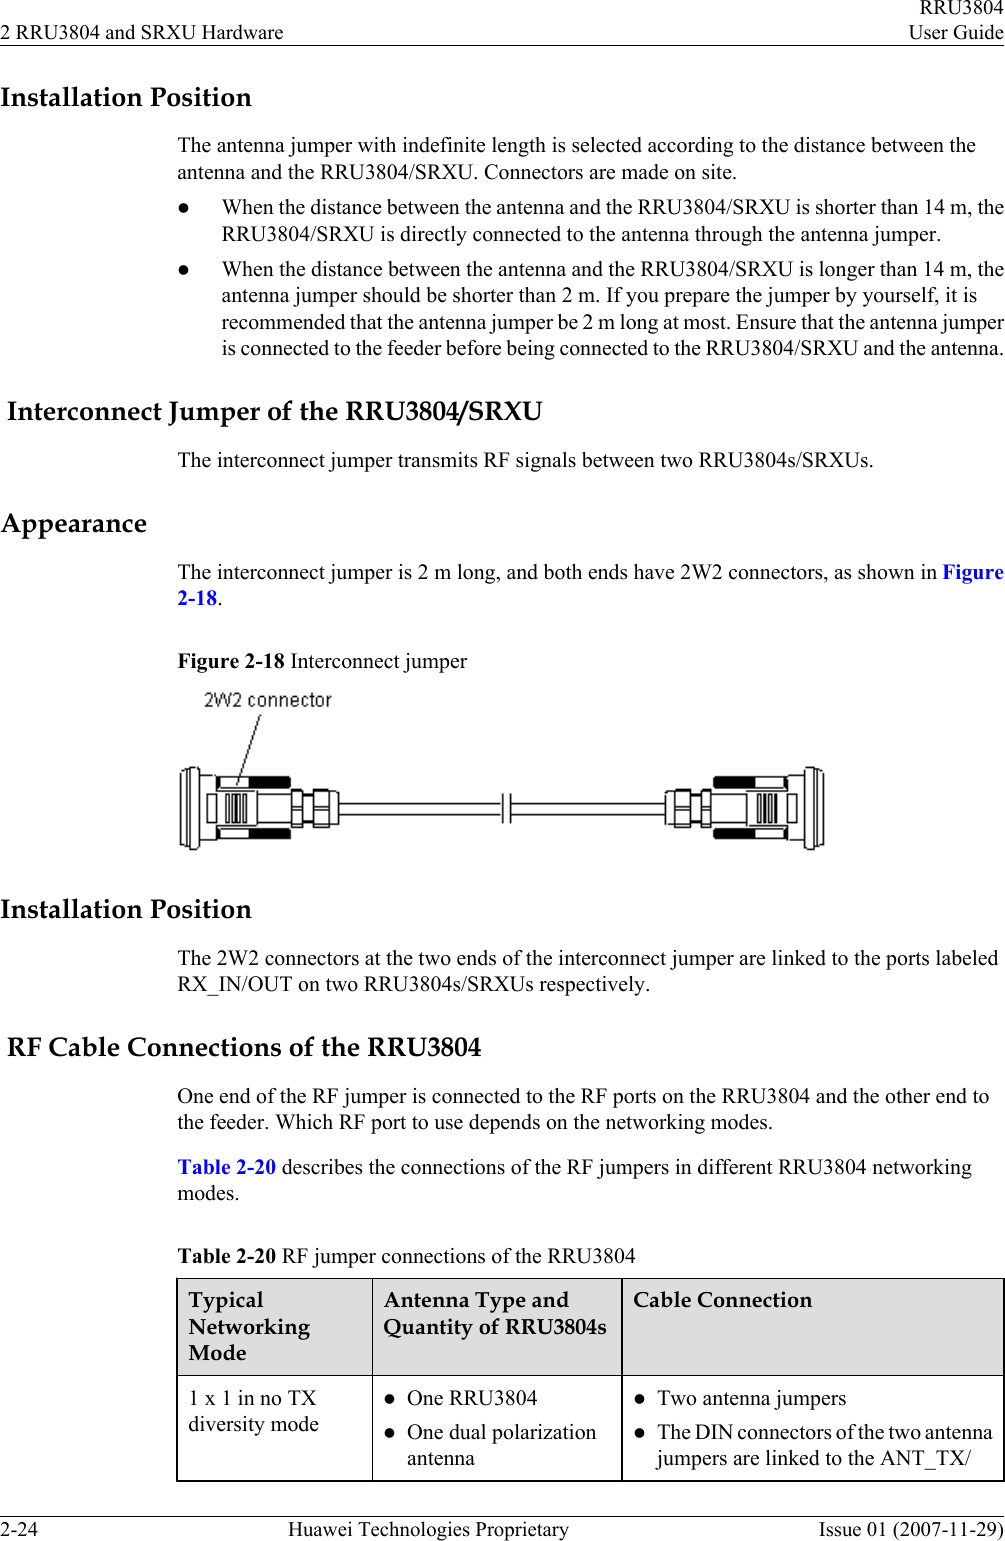 Installation PositionThe antenna jumper with indefinite length is selected according to the distance between theantenna and the RRU3804/SRXU. Connectors are made on site.lWhen the distance between the antenna and the RRU3804/SRXU is shorter than 14 m, theRRU3804/SRXU is directly connected to the antenna through the antenna jumper.lWhen the distance between the antenna and the RRU3804/SRXU is longer than 14 m, theantenna jumper should be shorter than 2 m. If you prepare the jumper by yourself, it isrecommended that the antenna jumper be 2 m long at most. Ensure that the antenna jumperis connected to the feeder before being connected to the RRU3804/SRXU and the antenna. Interconnect Jumper of the RRU3804/SRXUThe interconnect jumper transmits RF signals between two RRU3804s/SRXUs.AppearanceThe interconnect jumper is 2 m long, and both ends have 2W2 connectors, as shown in Figure2-18.Figure 2-18 Interconnect jumperInstallation PositionThe 2W2 connectors at the two ends of the interconnect jumper are linked to the ports labeledRX_IN/OUT on two RRU3804s/SRXUs respectively. RF Cable Connections of the RRU3804One end of the RF jumper is connected to the RF ports on the RRU3804 and the other end tothe feeder. Which RF port to use depends on the networking modes.Table 2-20 describes the connections of the RF jumpers in different RRU3804 networkingmodes.Table 2-20 RF jumper connections of the RRU3804TypicalNetworkingModeAntenna Type andQuantity of RRU3804sCable Connection1 x 1 in no TXdiversity modelOne RRU3804lOne dual polarizationantennalTwo antenna jumperslThe DIN connectors of the two antennajumpers are linked to the ANT_TX/2 RRU3804 and SRXU HardwareRRU3804User Guide2-24 Huawei Technologies Proprietary Issue 01 (2007-11-29)